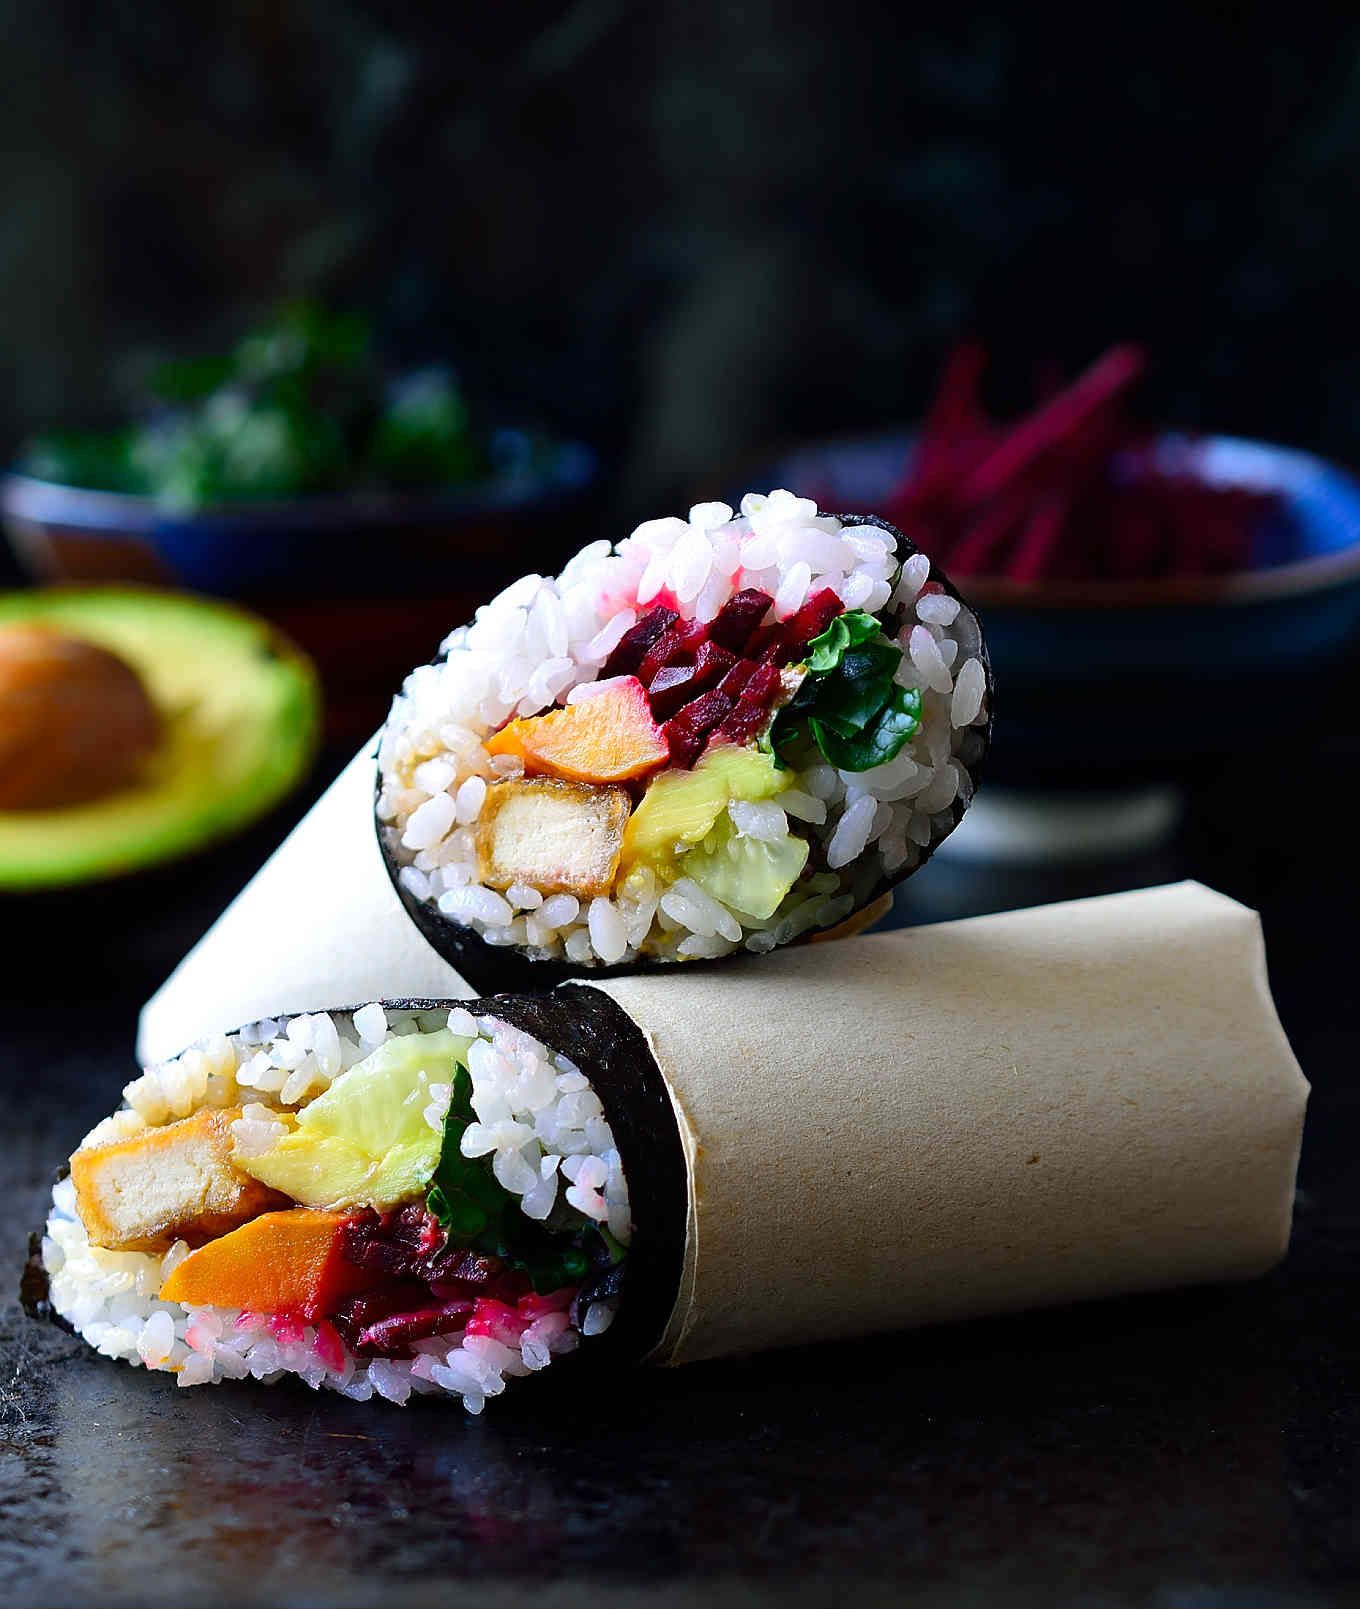 This vegan sushi burrito recipe is the marriage between two great foods in one perfect hand-held package. They’re easy to make, packed with flavour and super adaptable to whatever fillings you choose. I’ve stuffed sushi burritos with a rainbow of vegetables and deliciously crispy fried teriyaki tofu.